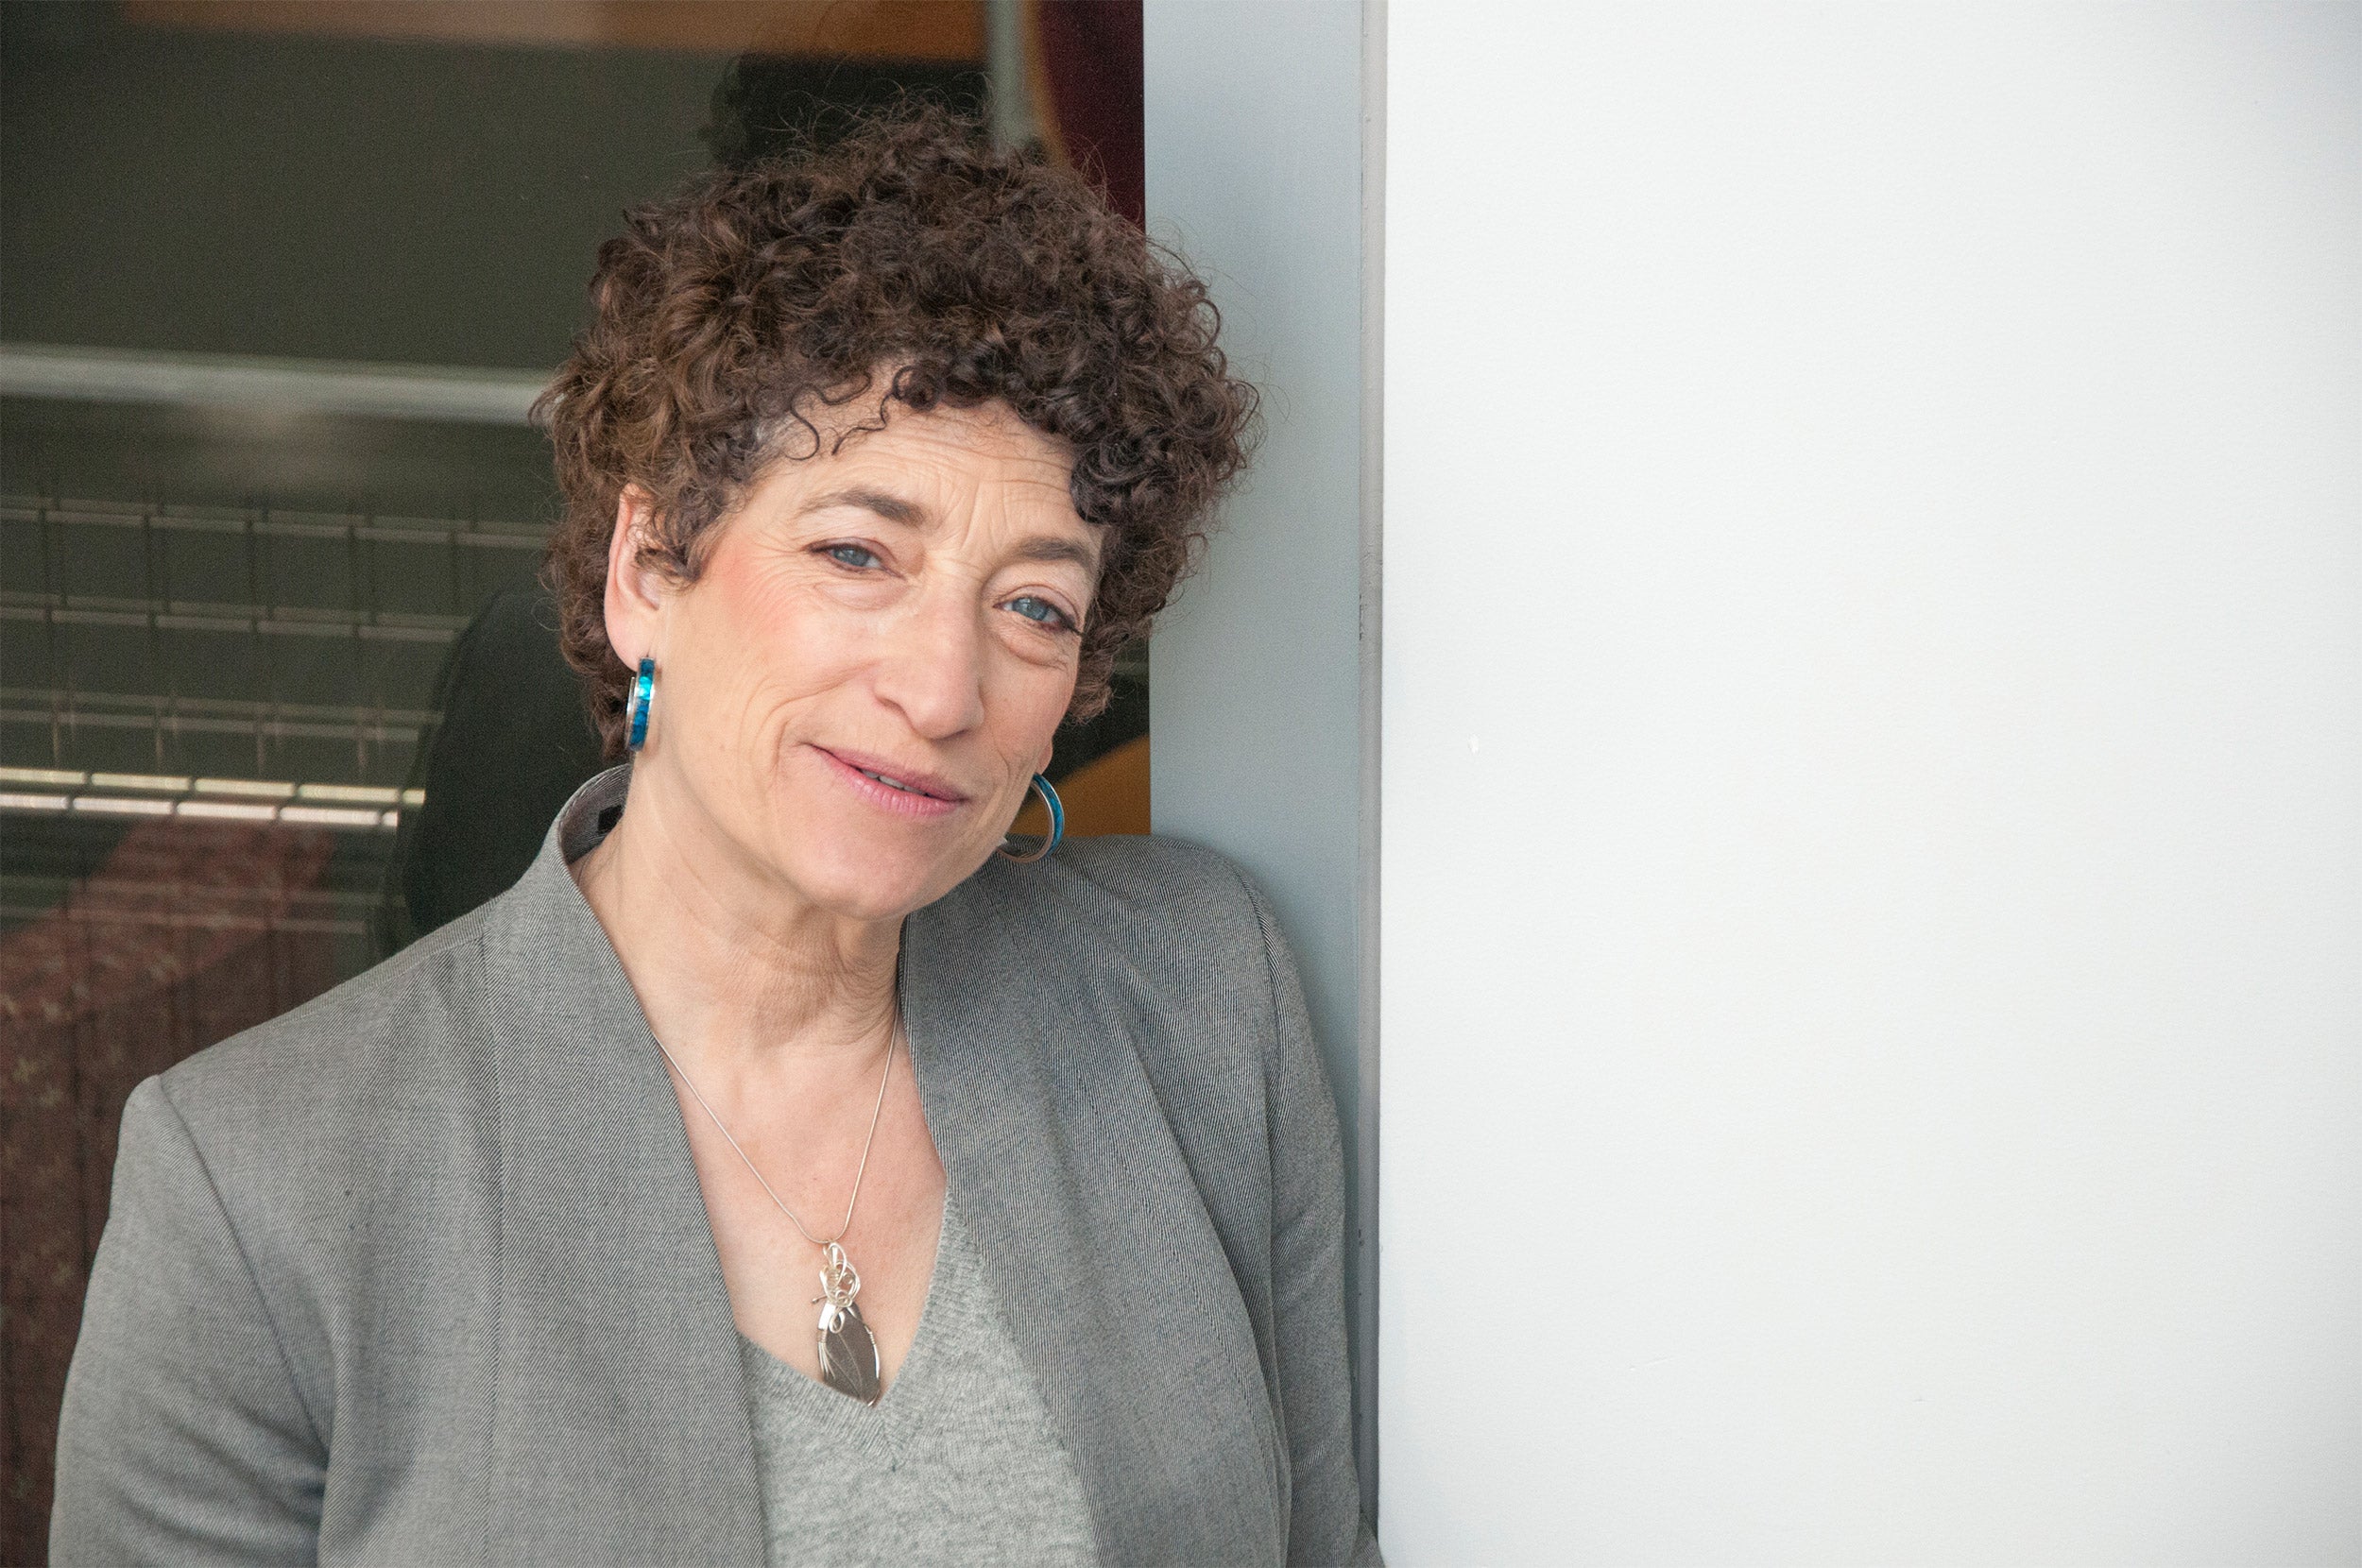 Portrait of Naomi Oreskes, author of "Why Trust Science?"